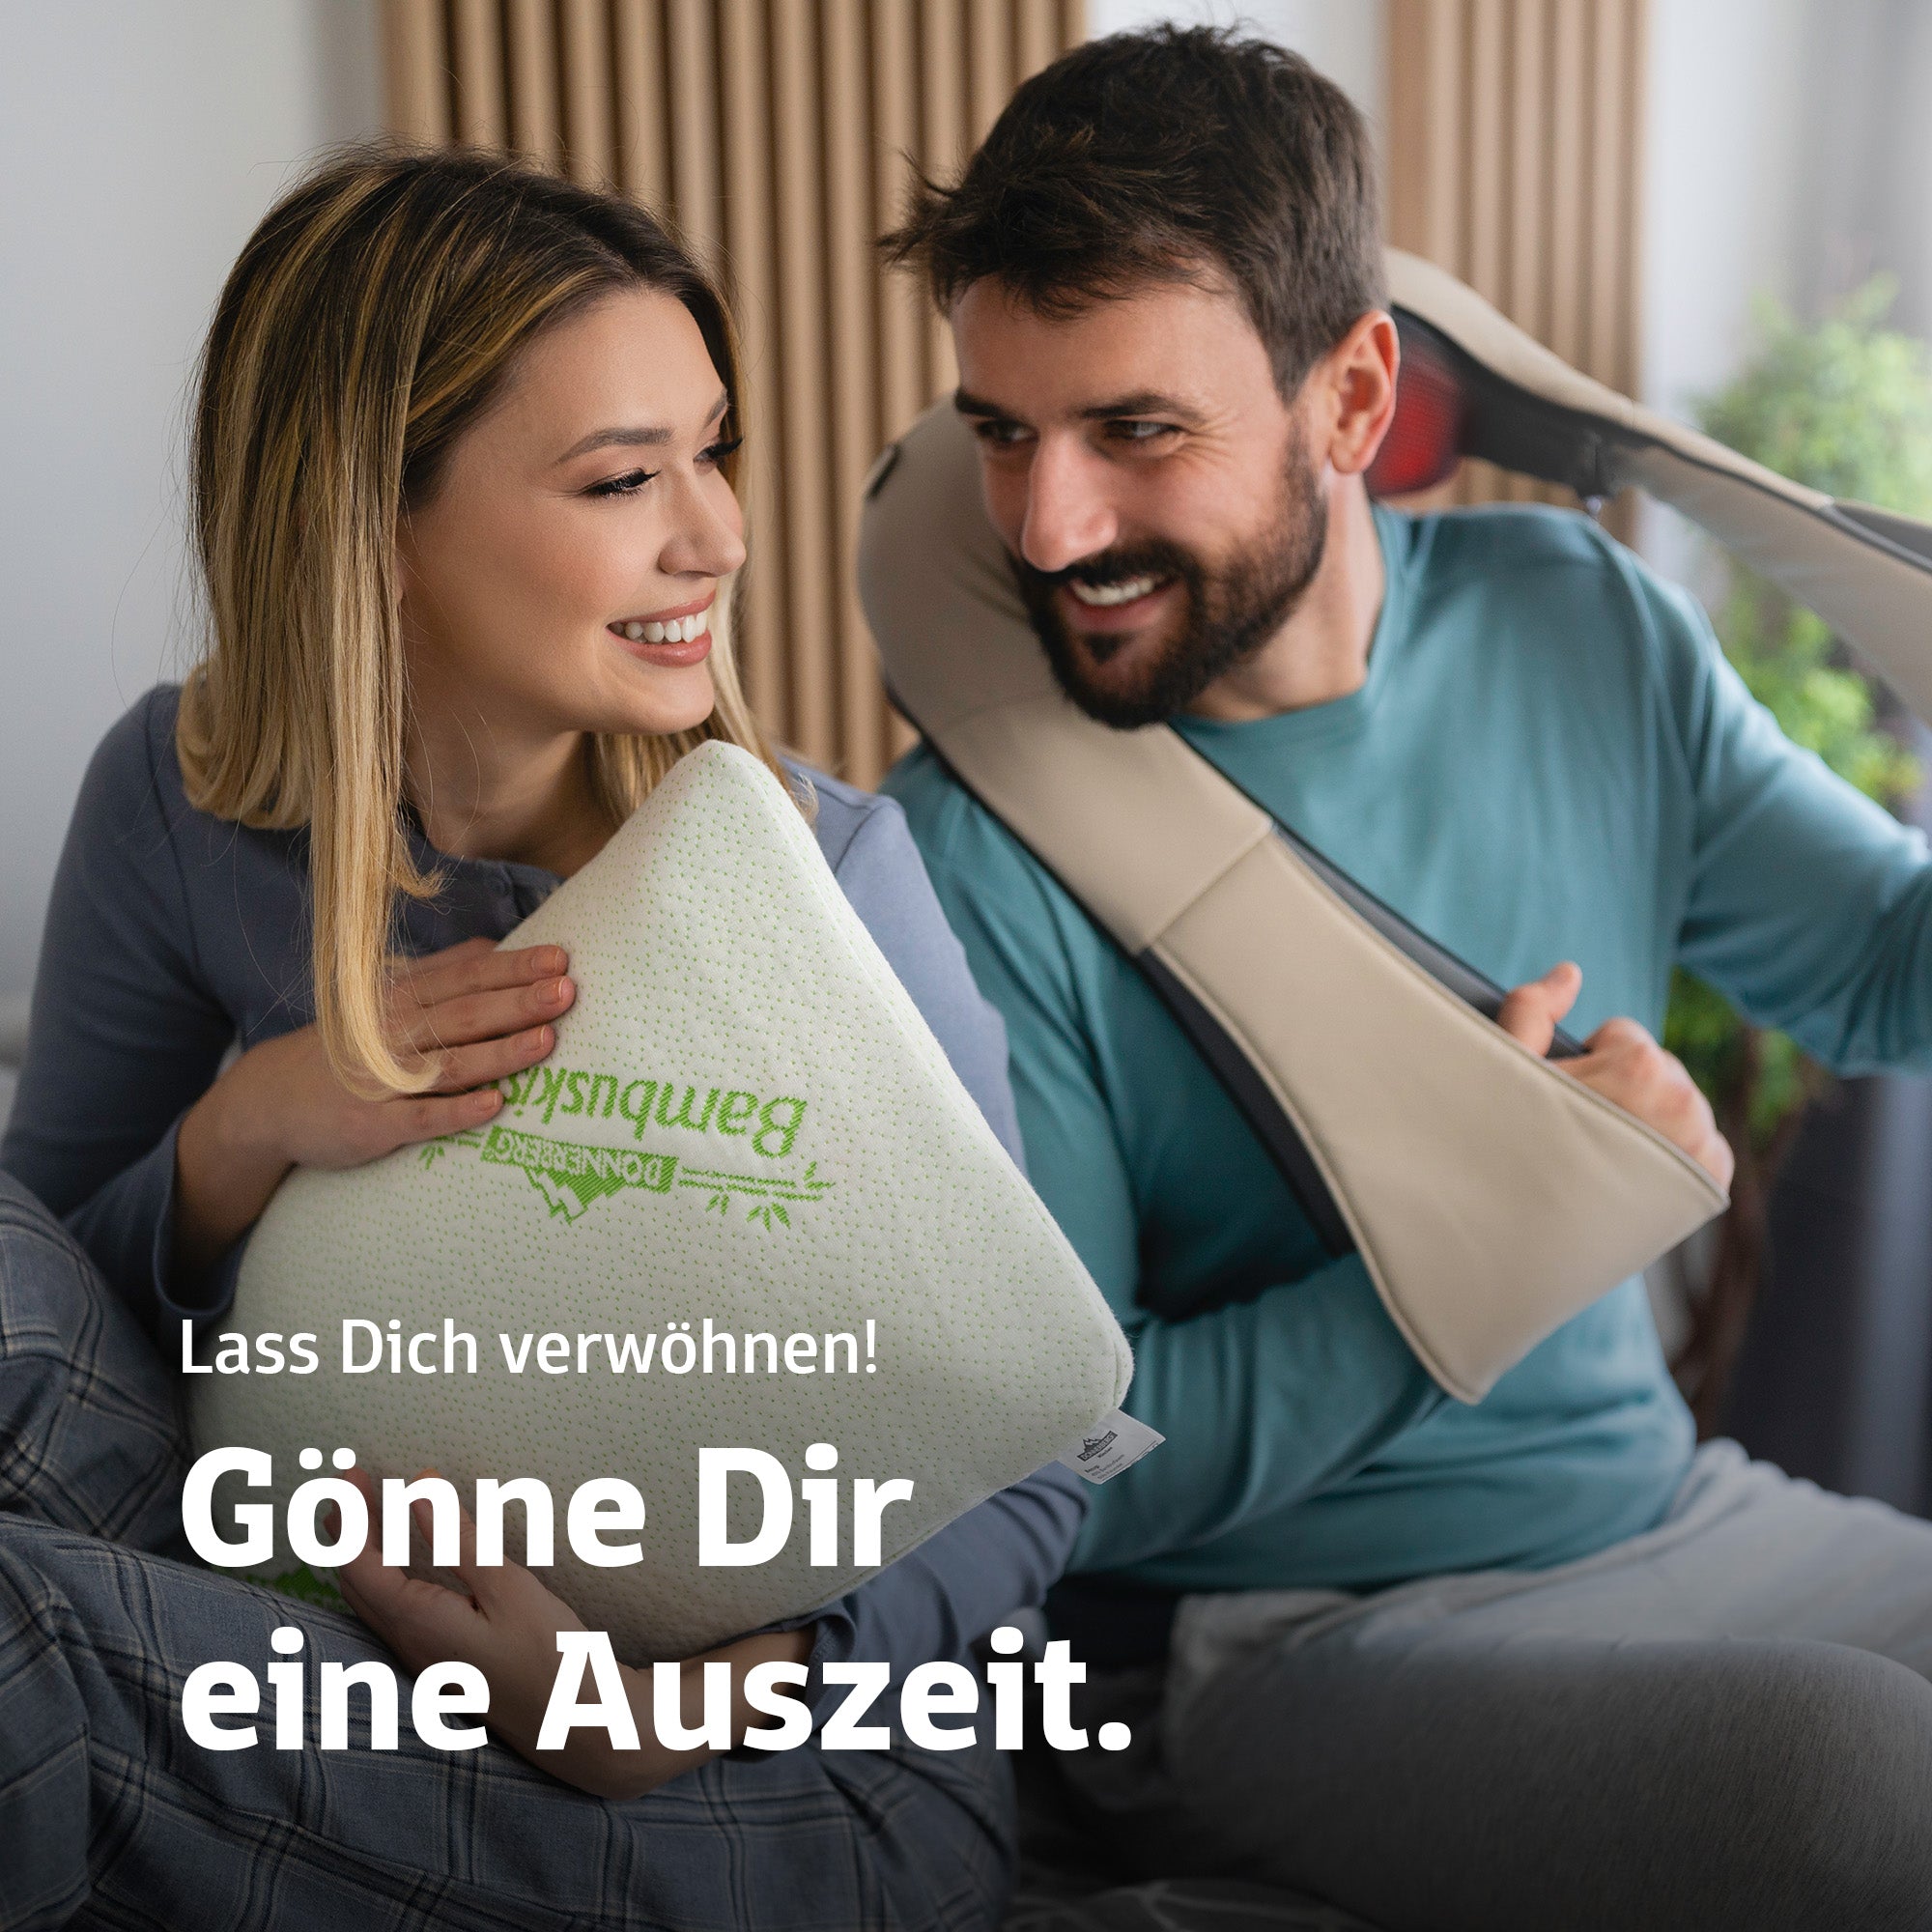 Man using Donnerberg neck massager and woman holding neck pillow